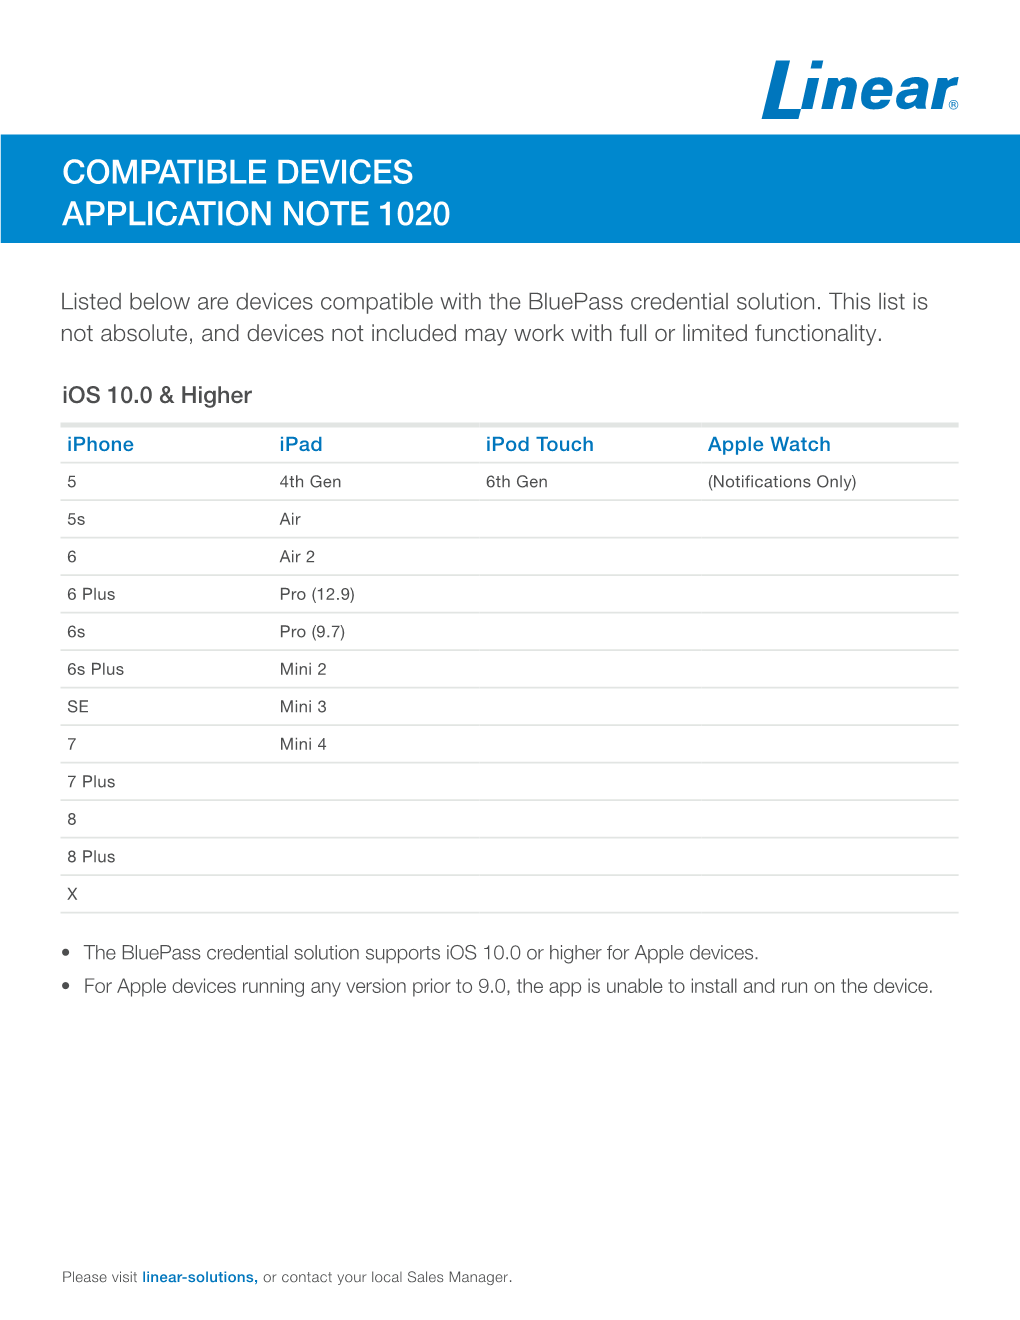 Compatible Devices Application Note 1020